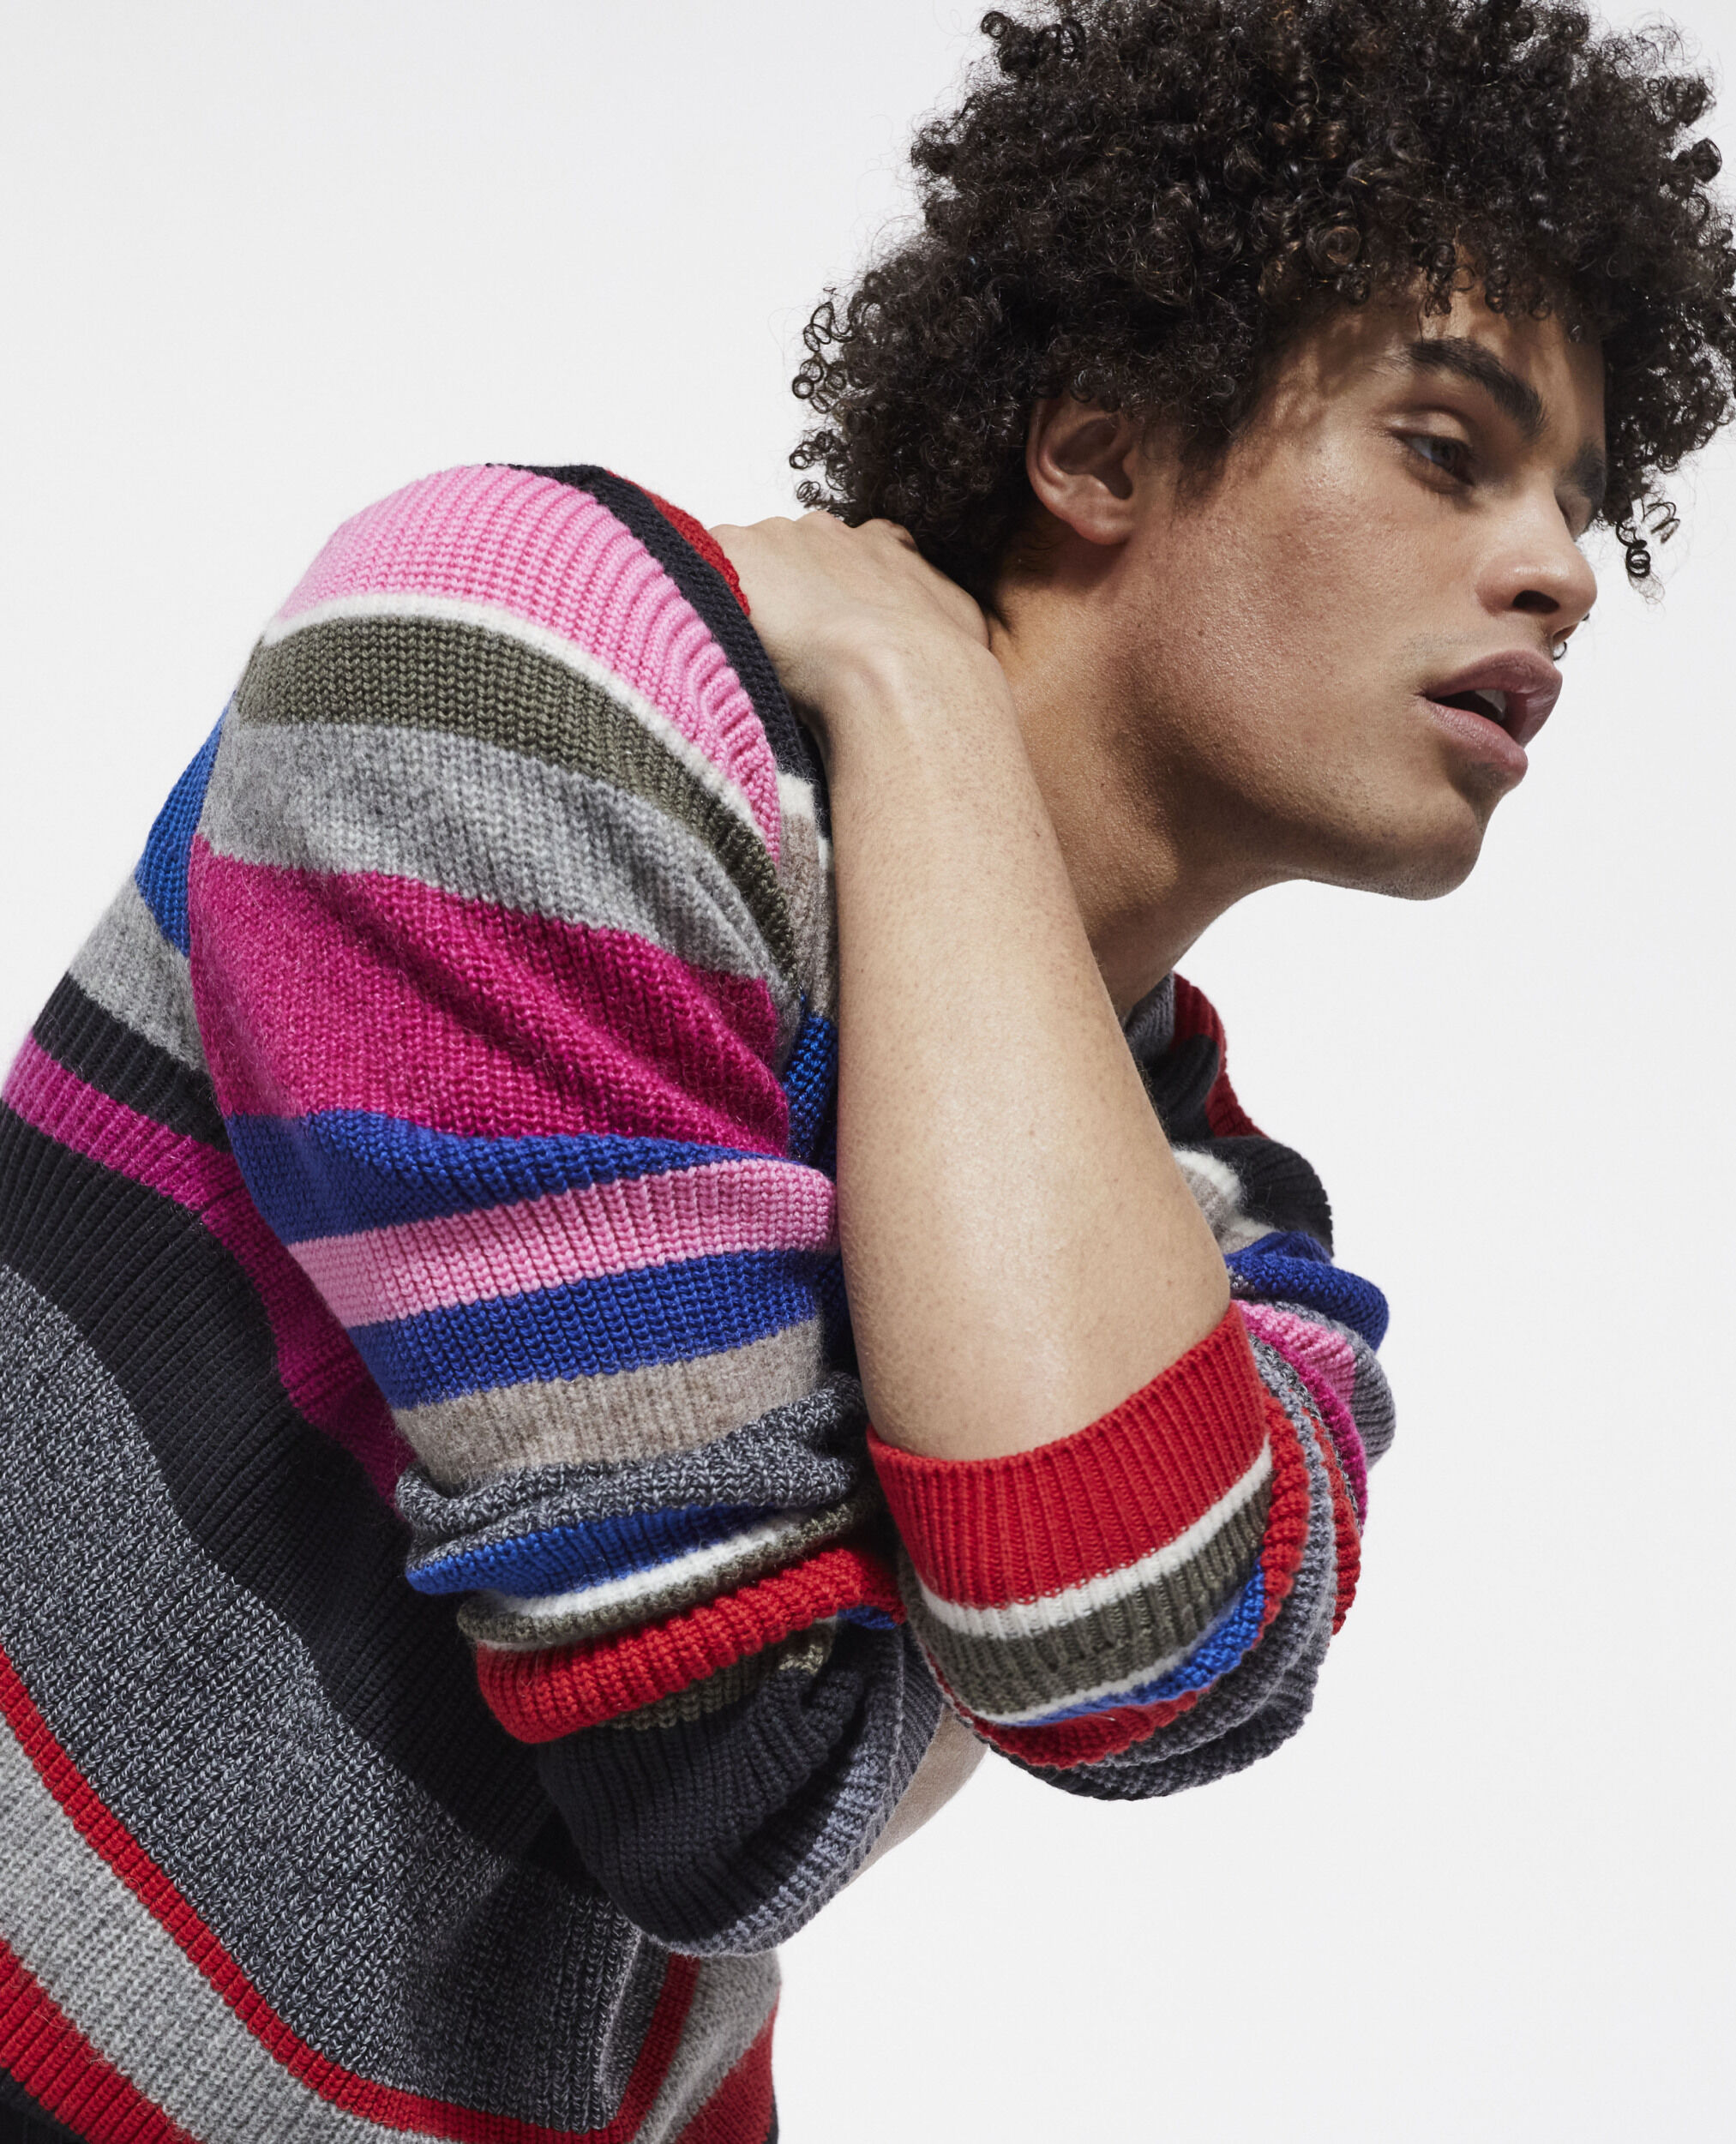 Multicolored wool sweater, MULTICO, hi-res image number null